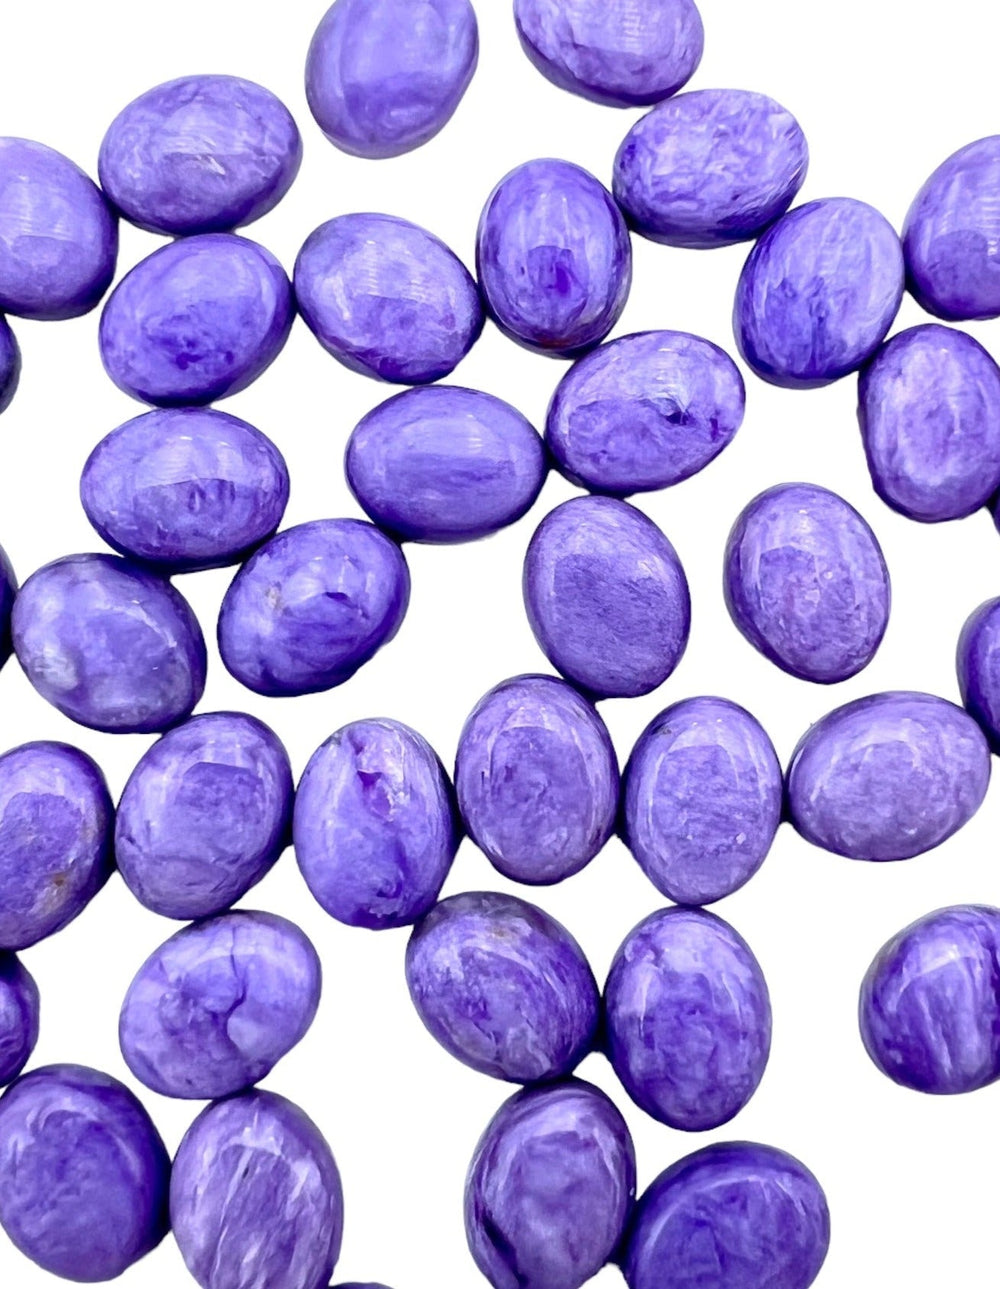 Premium Color Charoite 9x7mm Calibrated Oval Cabochons